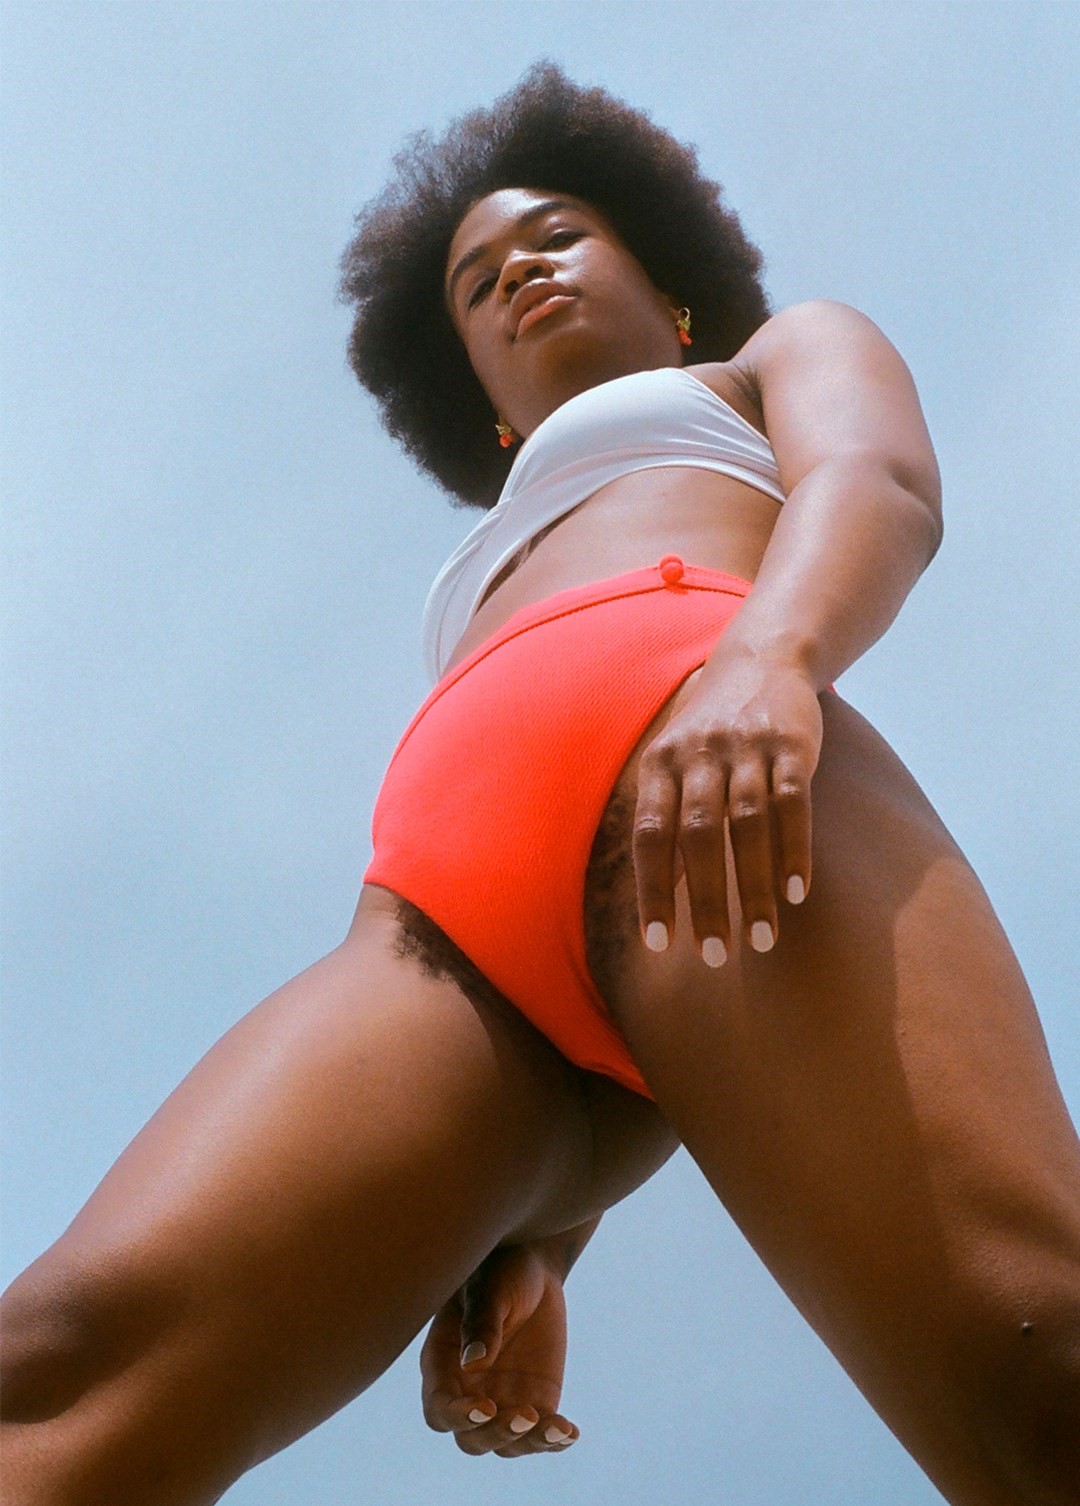 Razor brand Billie puts pubic hair front and centre in new campaign | Dazed